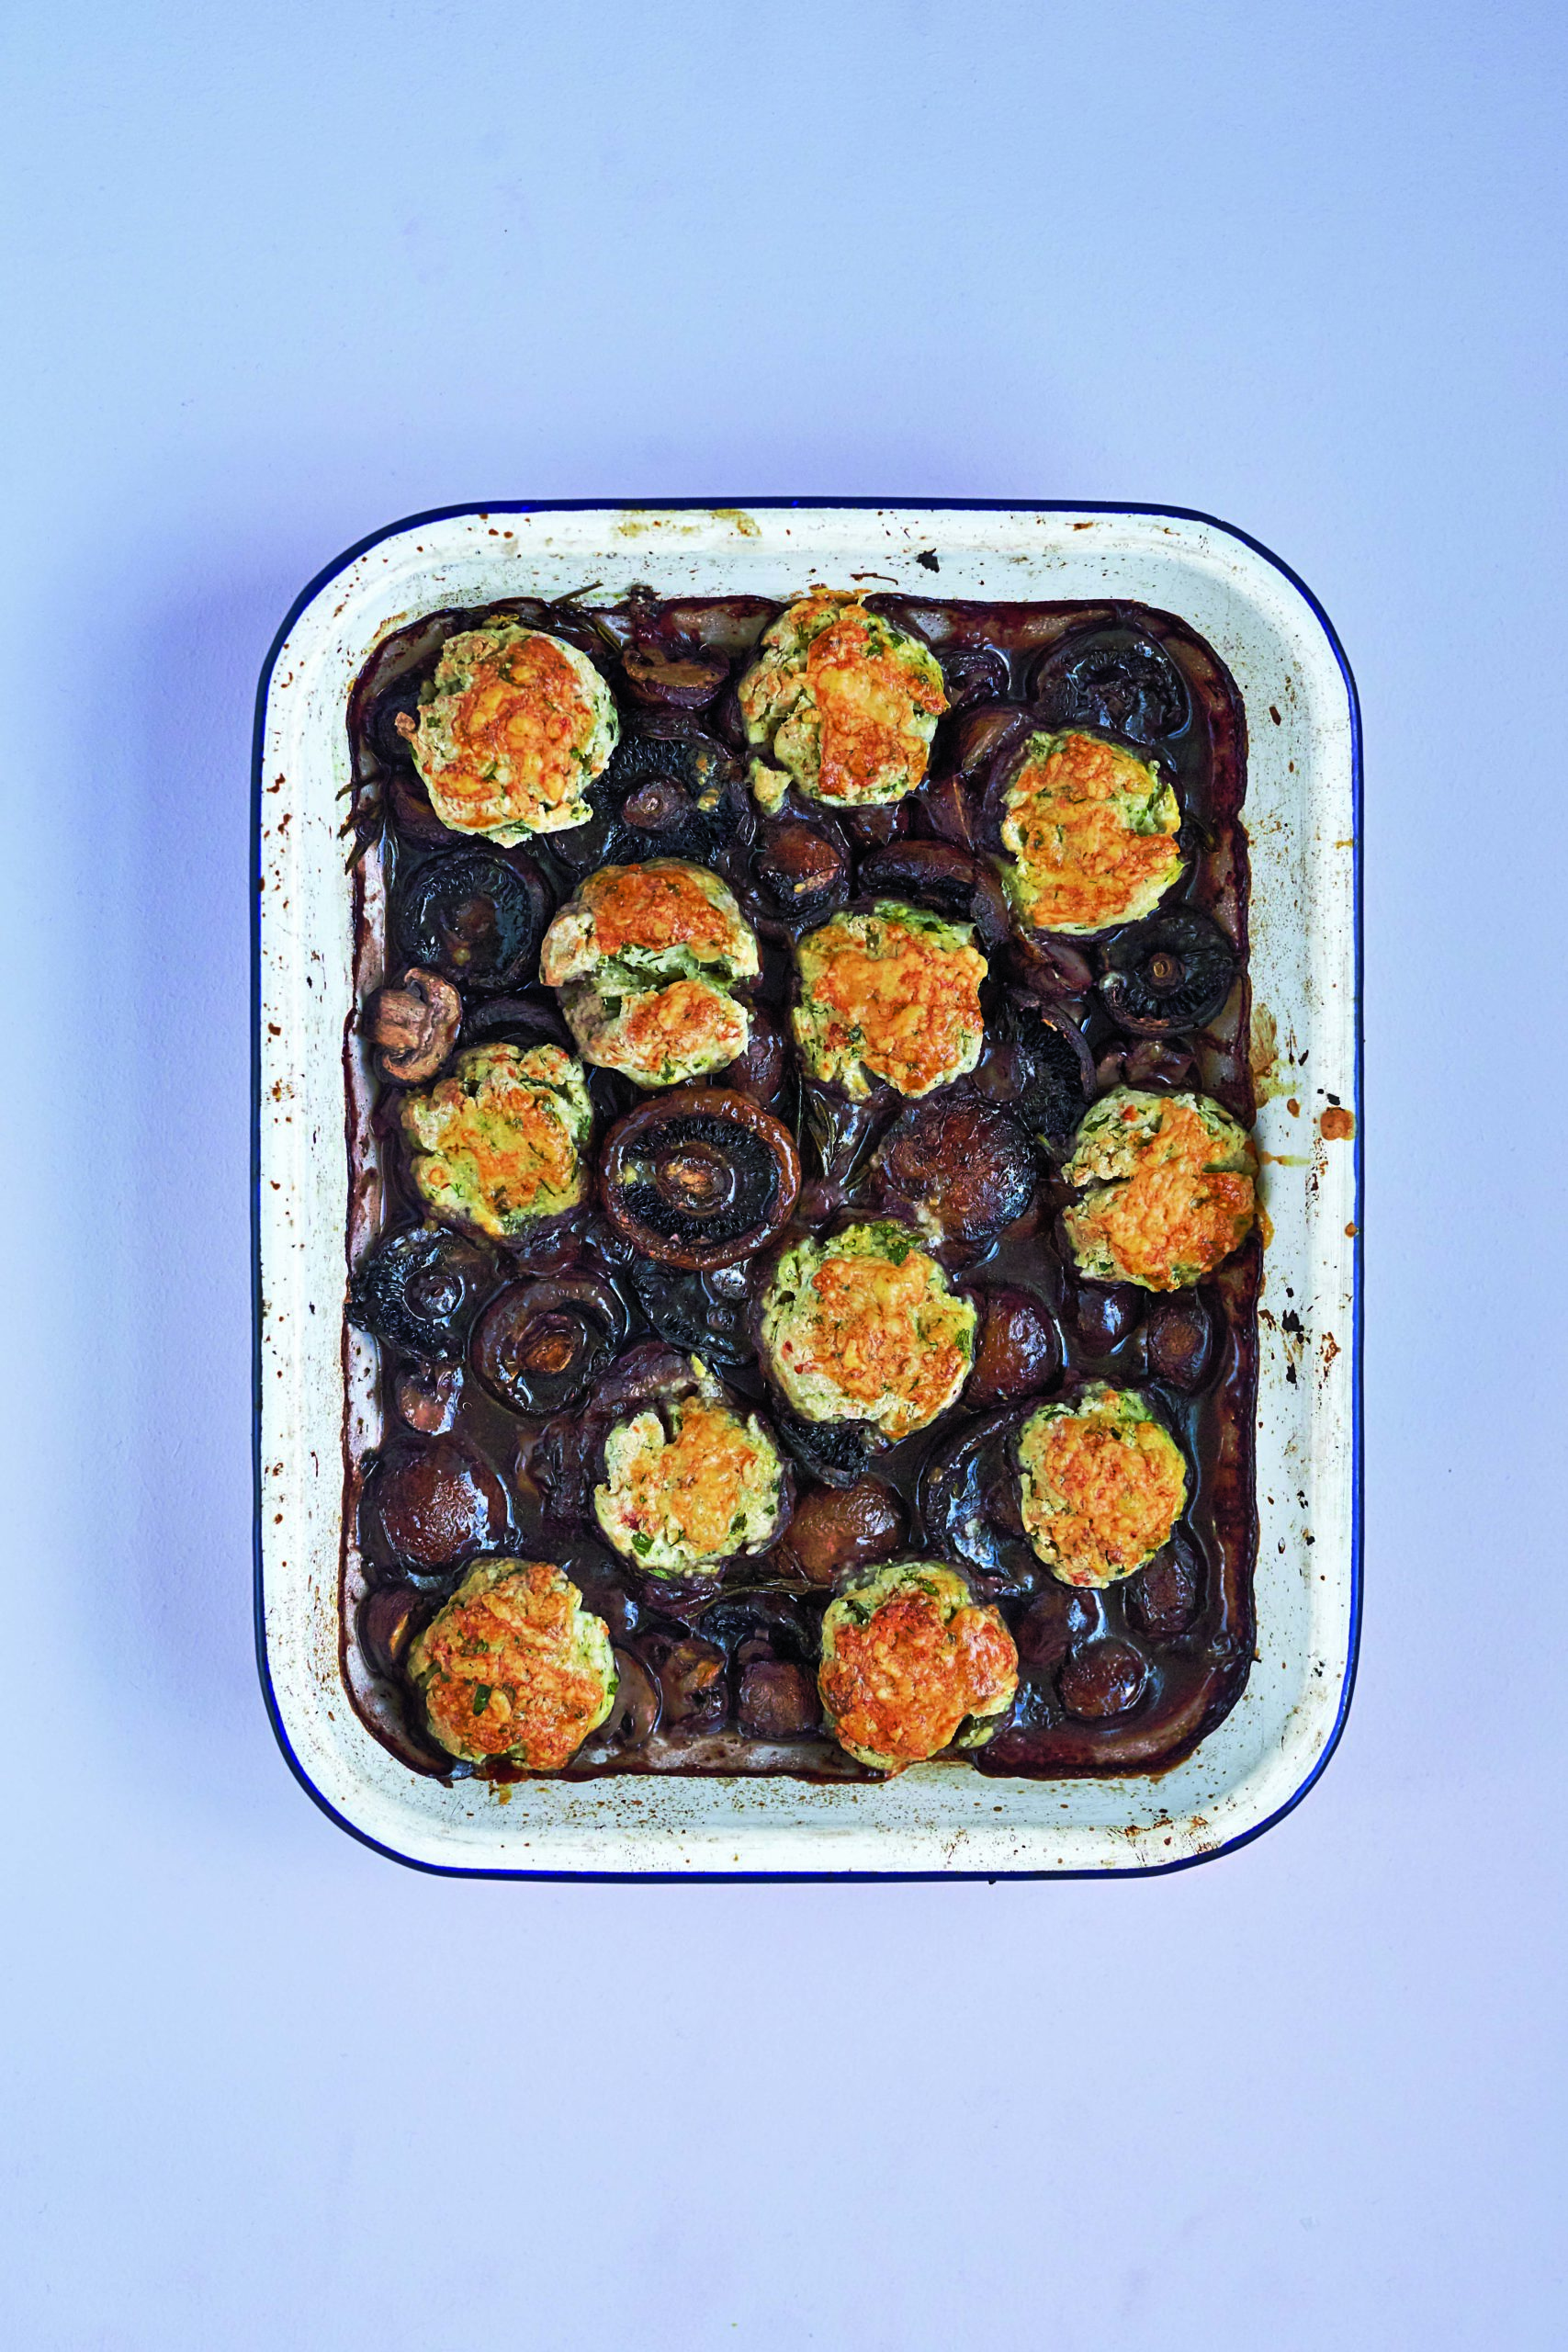 Red Wine Mushroom Casserole With A Cheese Cobbler Topping